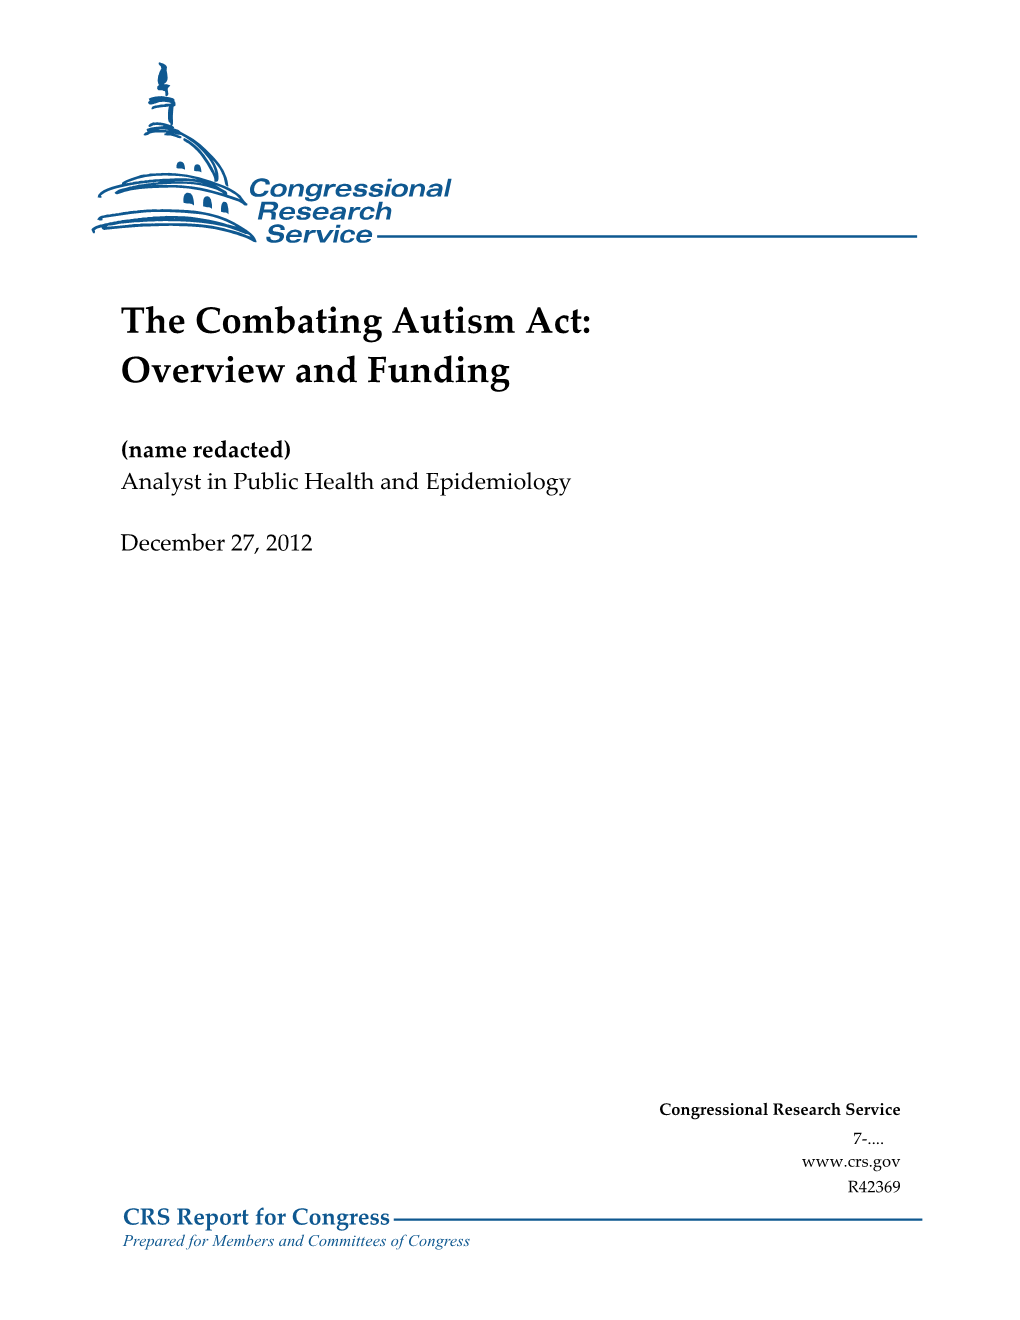 The Combating Autism Act: Overview and Funding